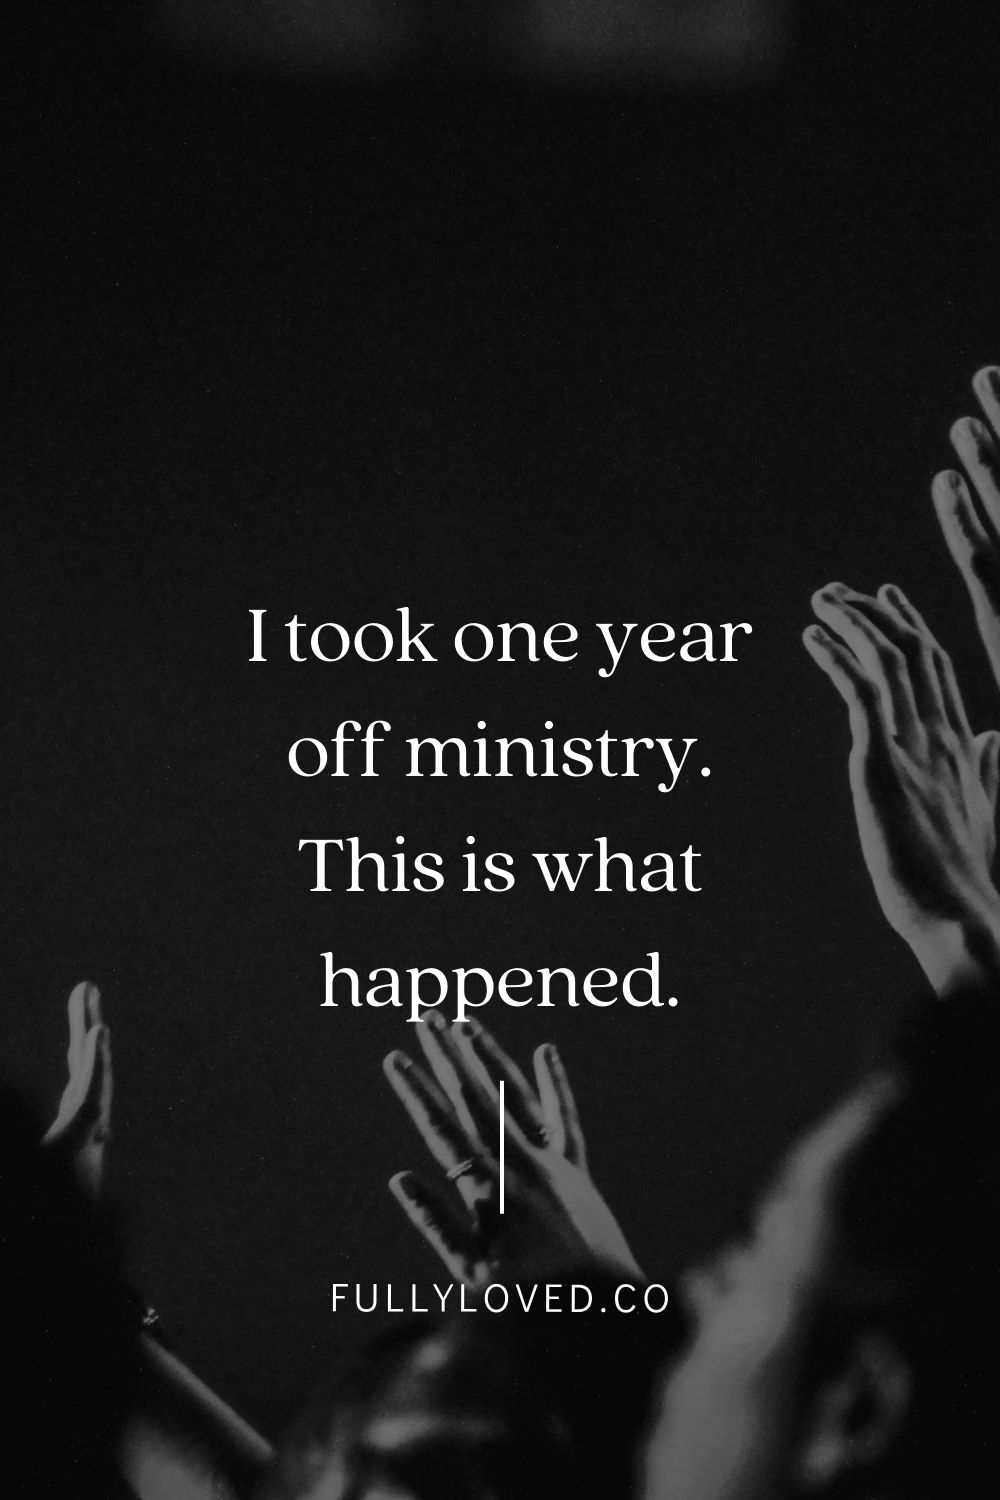 What happened when I took one year off ministry